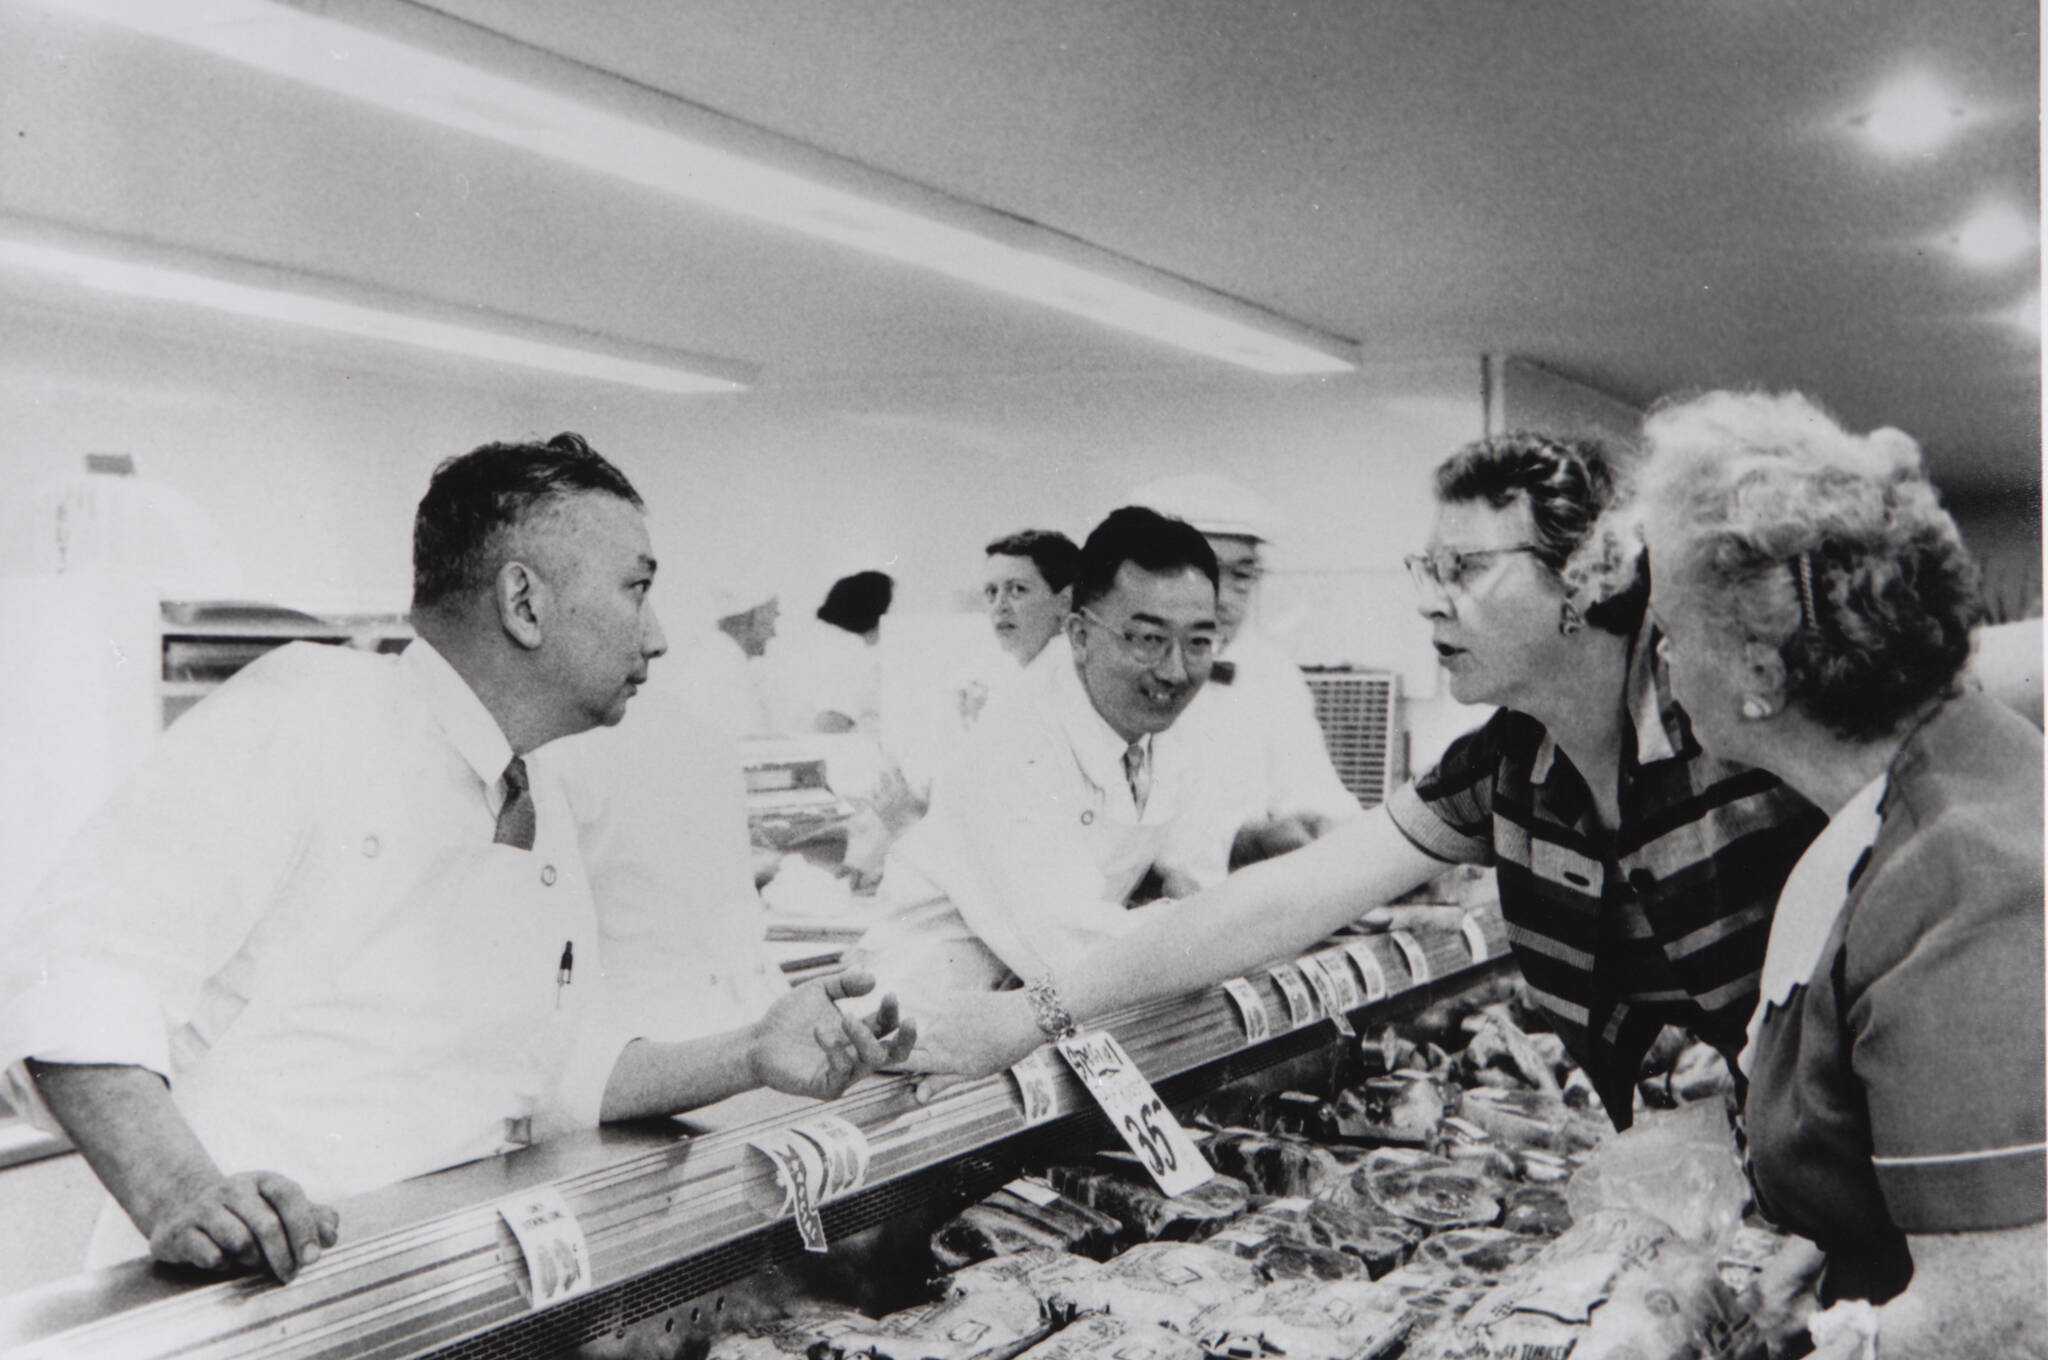 T&C courtesy photo
Brothers Mo and John Nakata speak with customers at the Town & Country Market butcher counter in an undated photo.